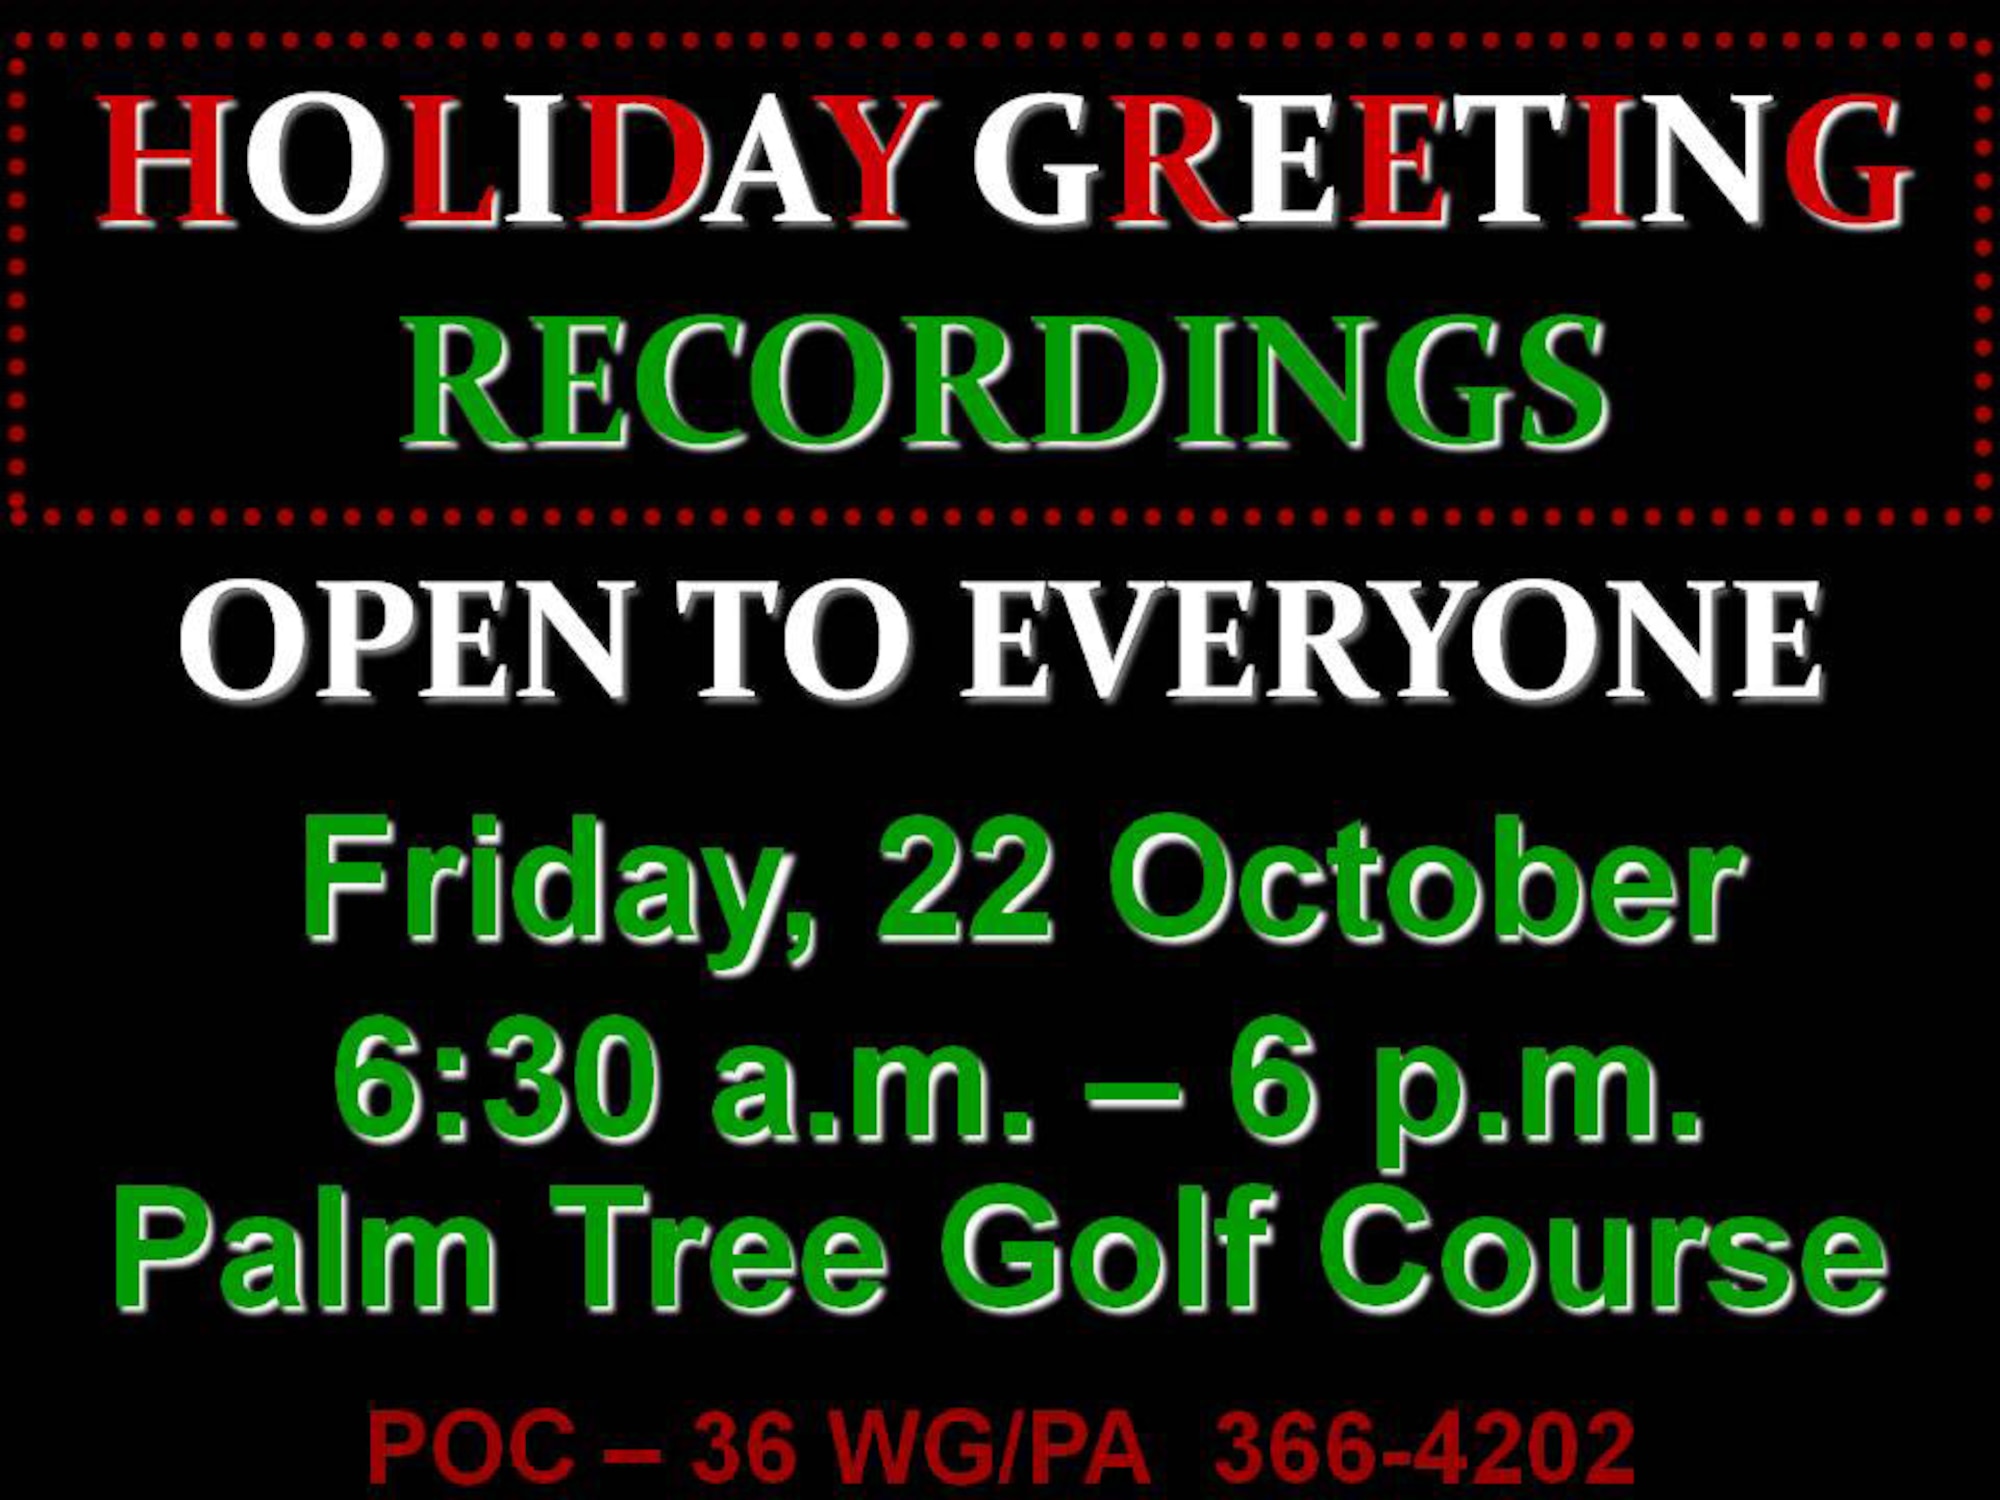 Holiday Greeting Recordings, 22 Oct. 